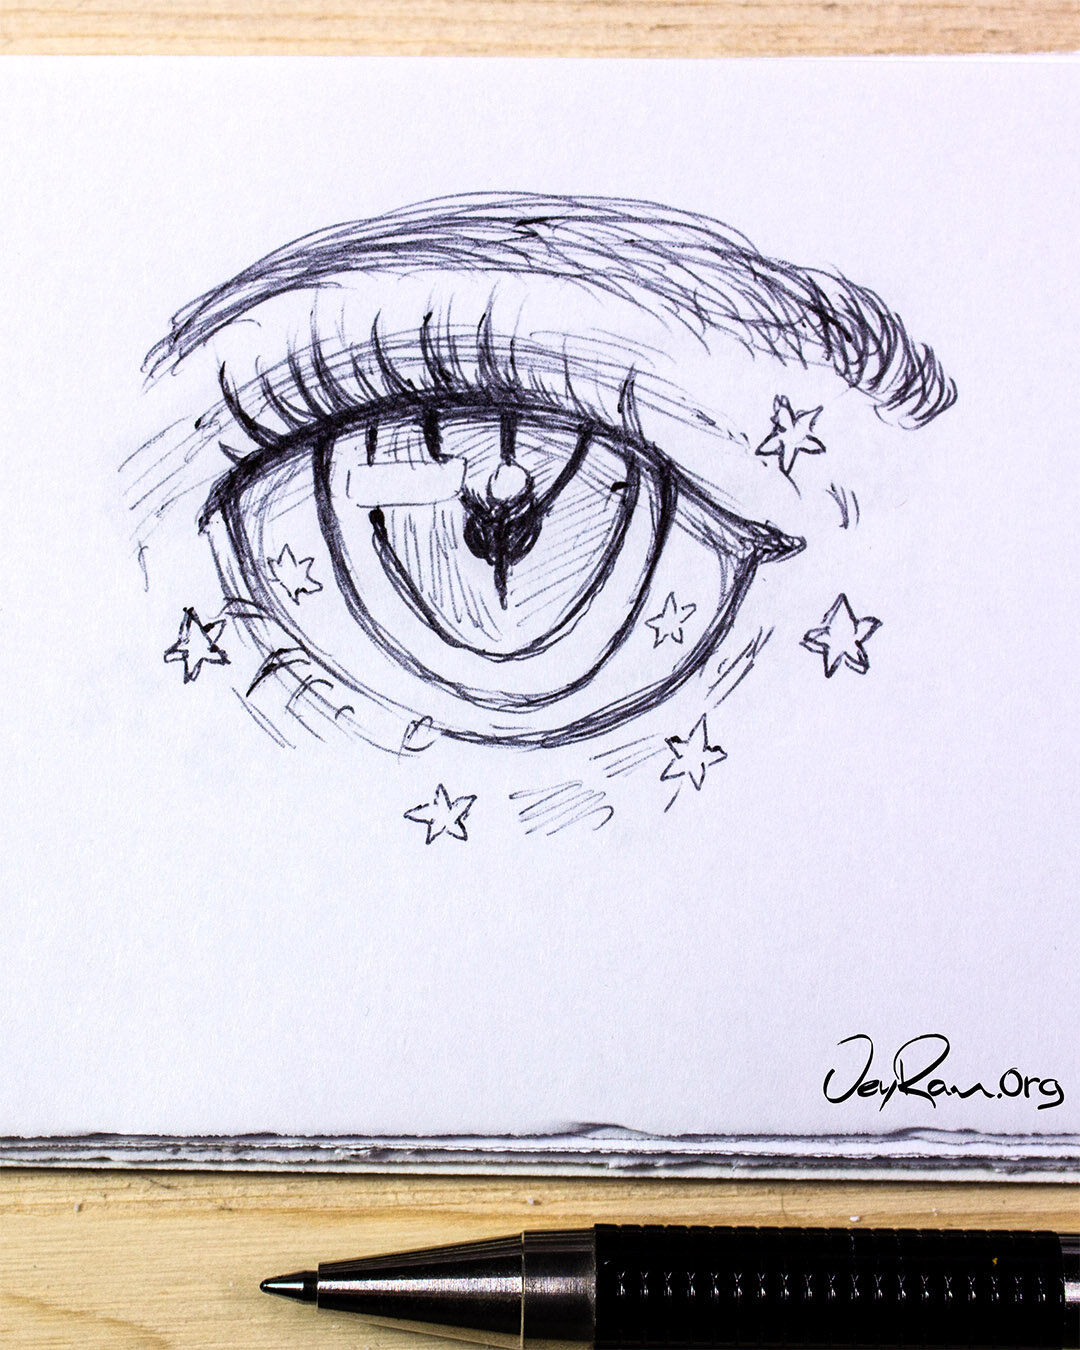 Female Anime Eye Reference for Character Drawings &amp; Designs by JeyRam #anime #manga #art 